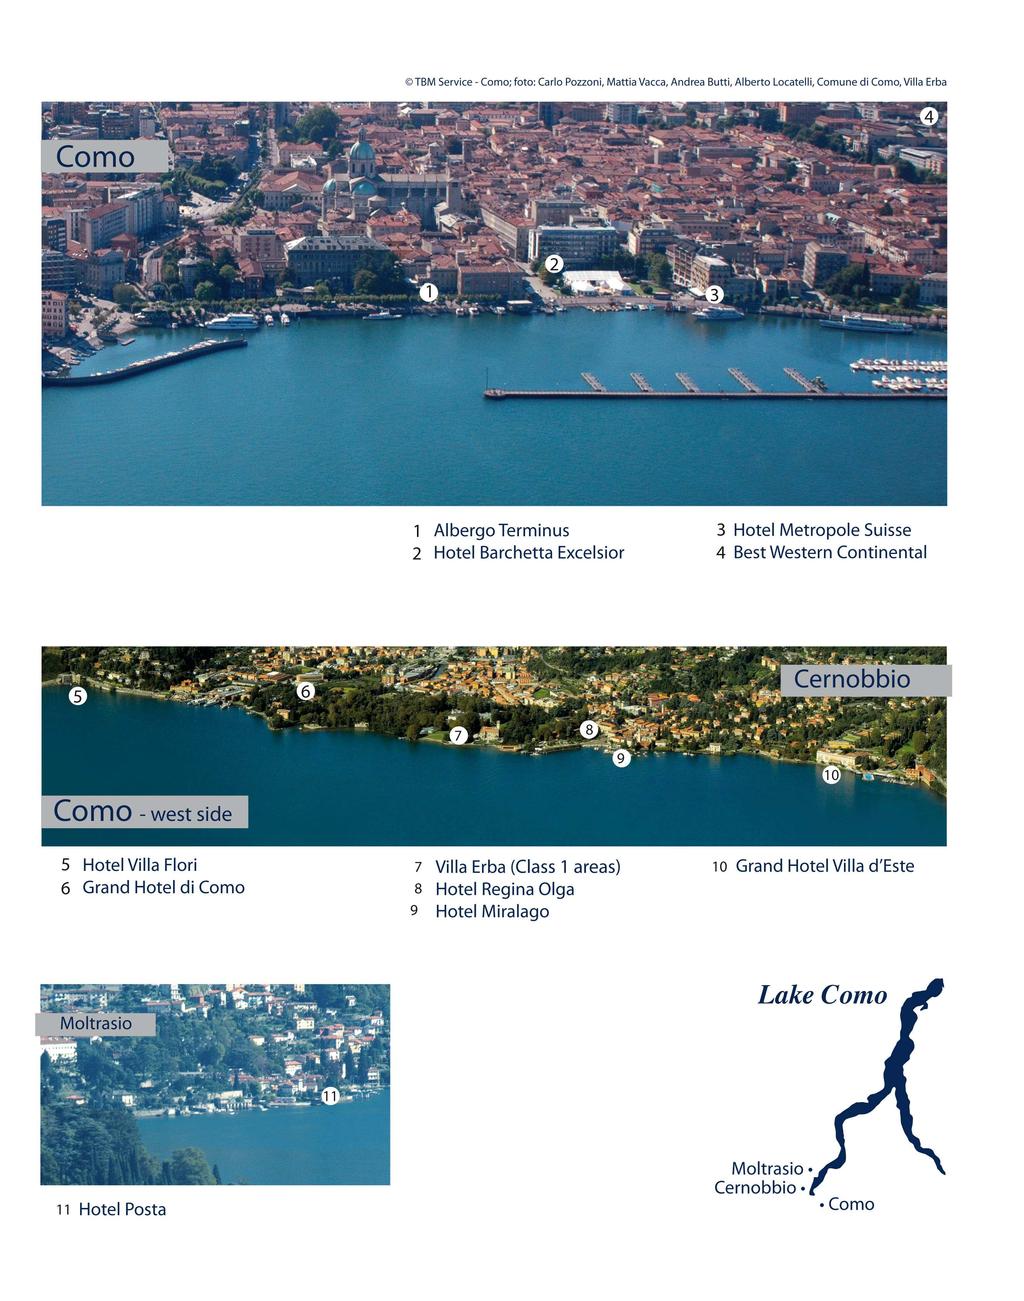 Hotels location map N: Como and Moltrasio